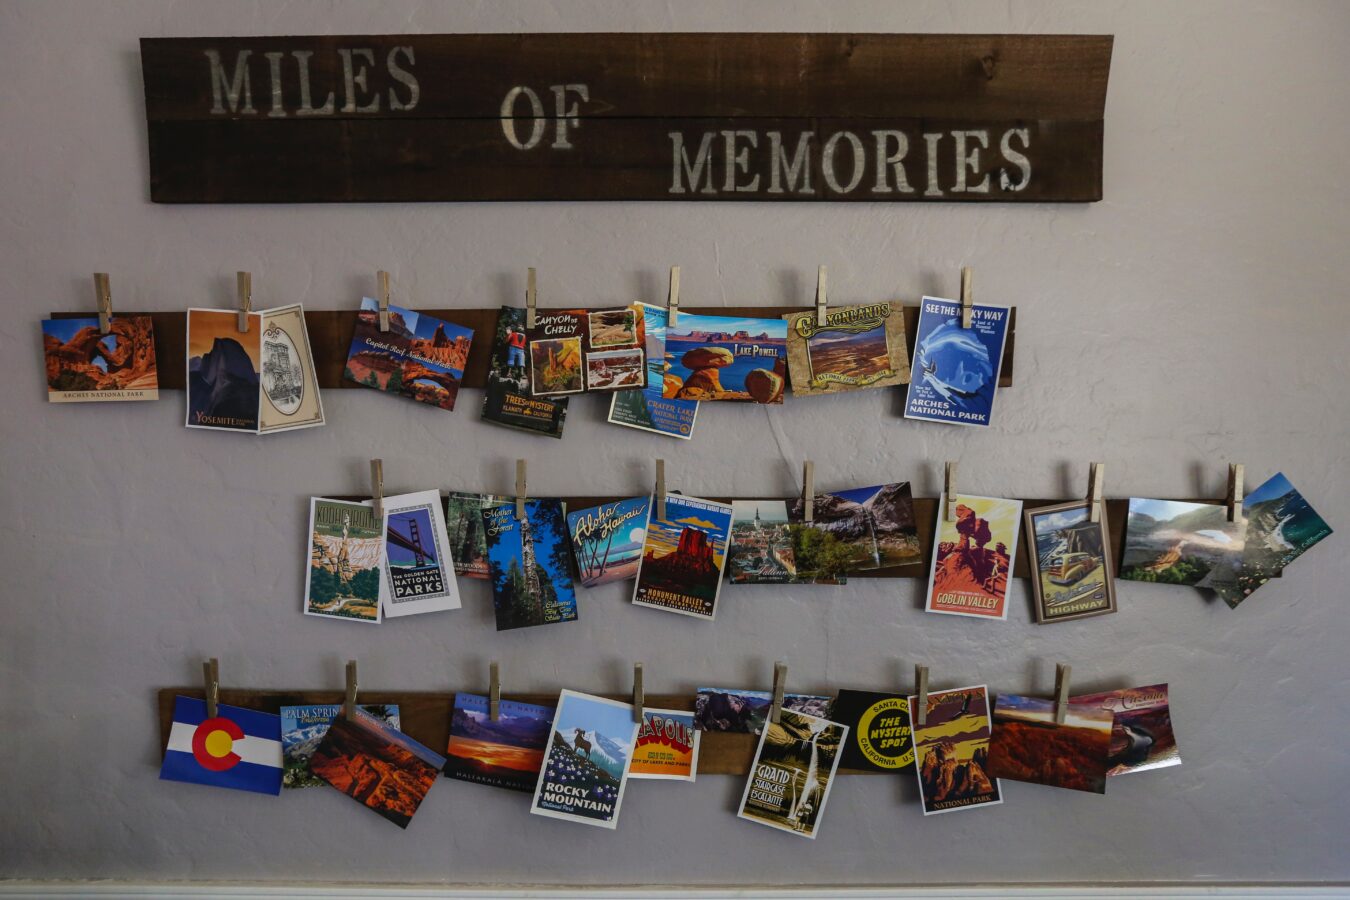 My nephew is a travel hound. He and his wife love road trips and started a wall to illustrate where all they have traveled together. I love the national parks retro design style and that makes up a good portion of the postcards on this wall of memories.